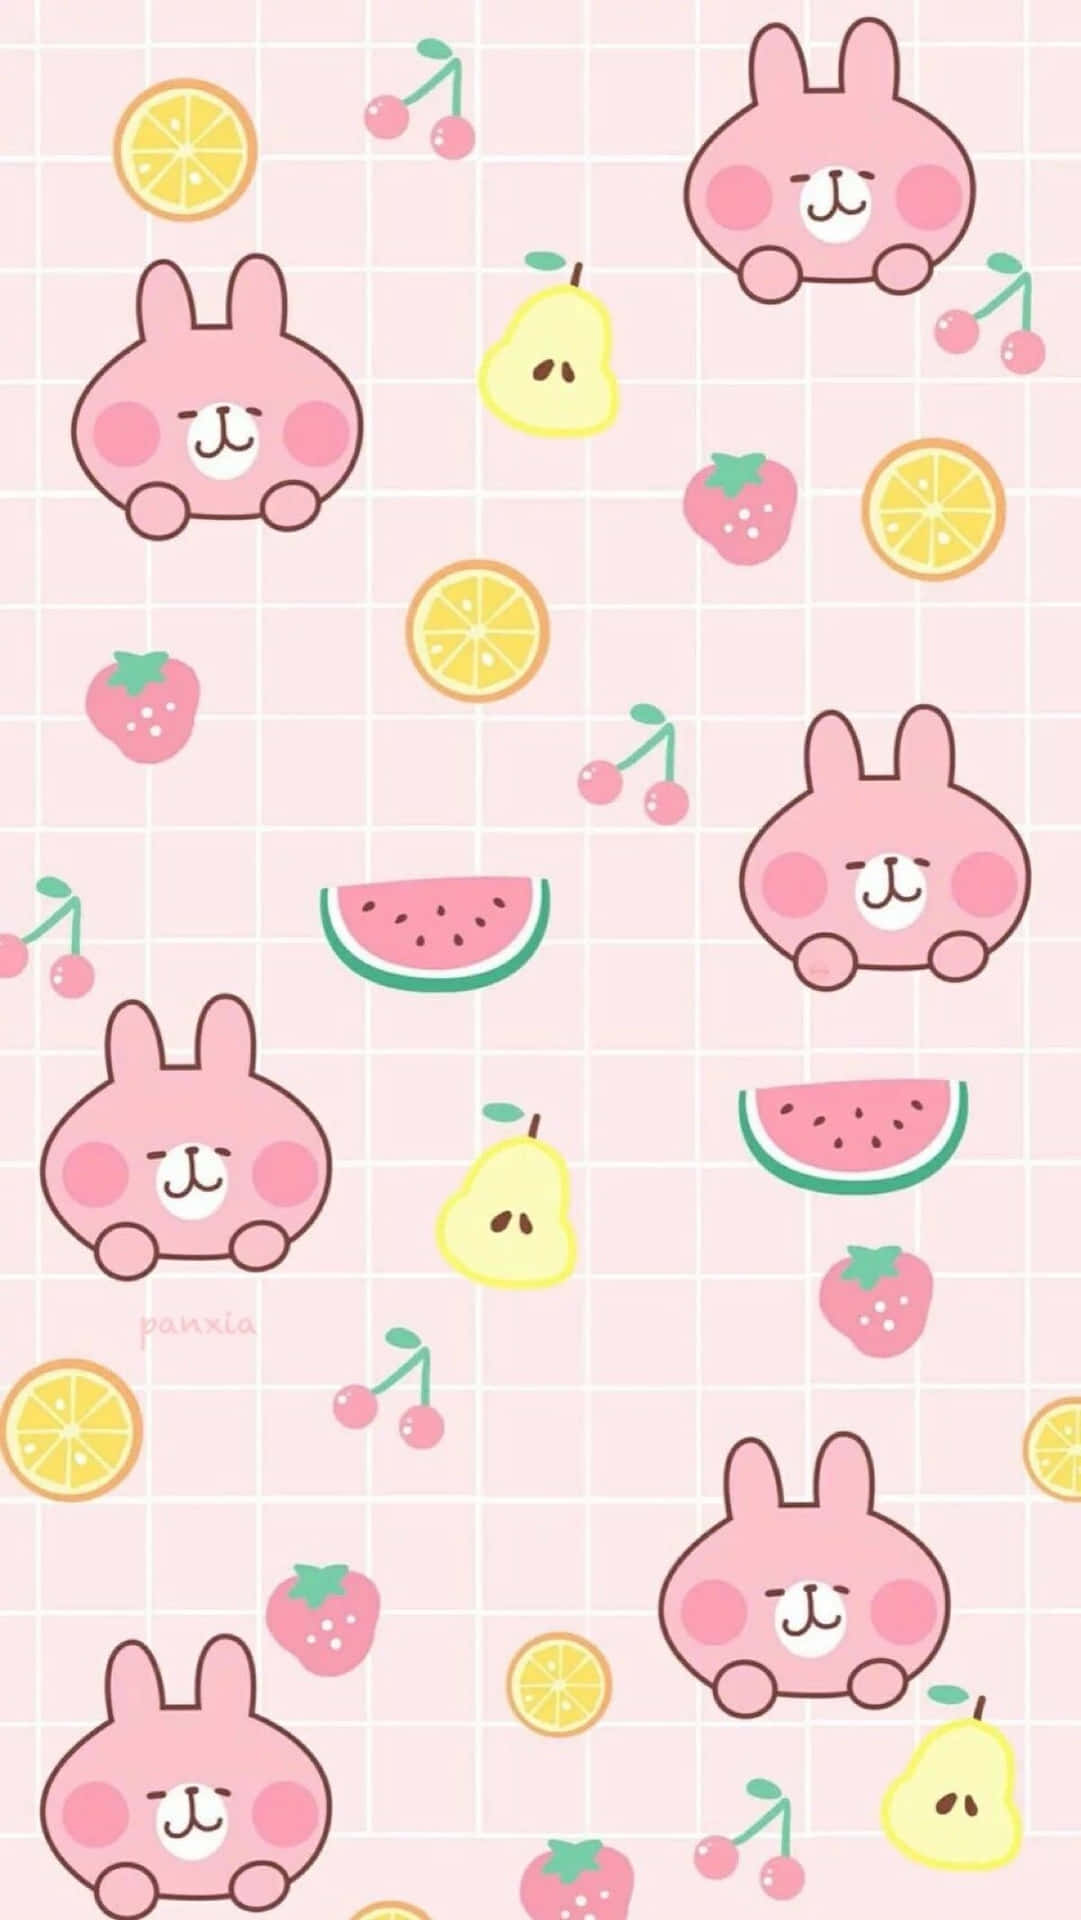 Patterned, An iPhone Wallpaper Game